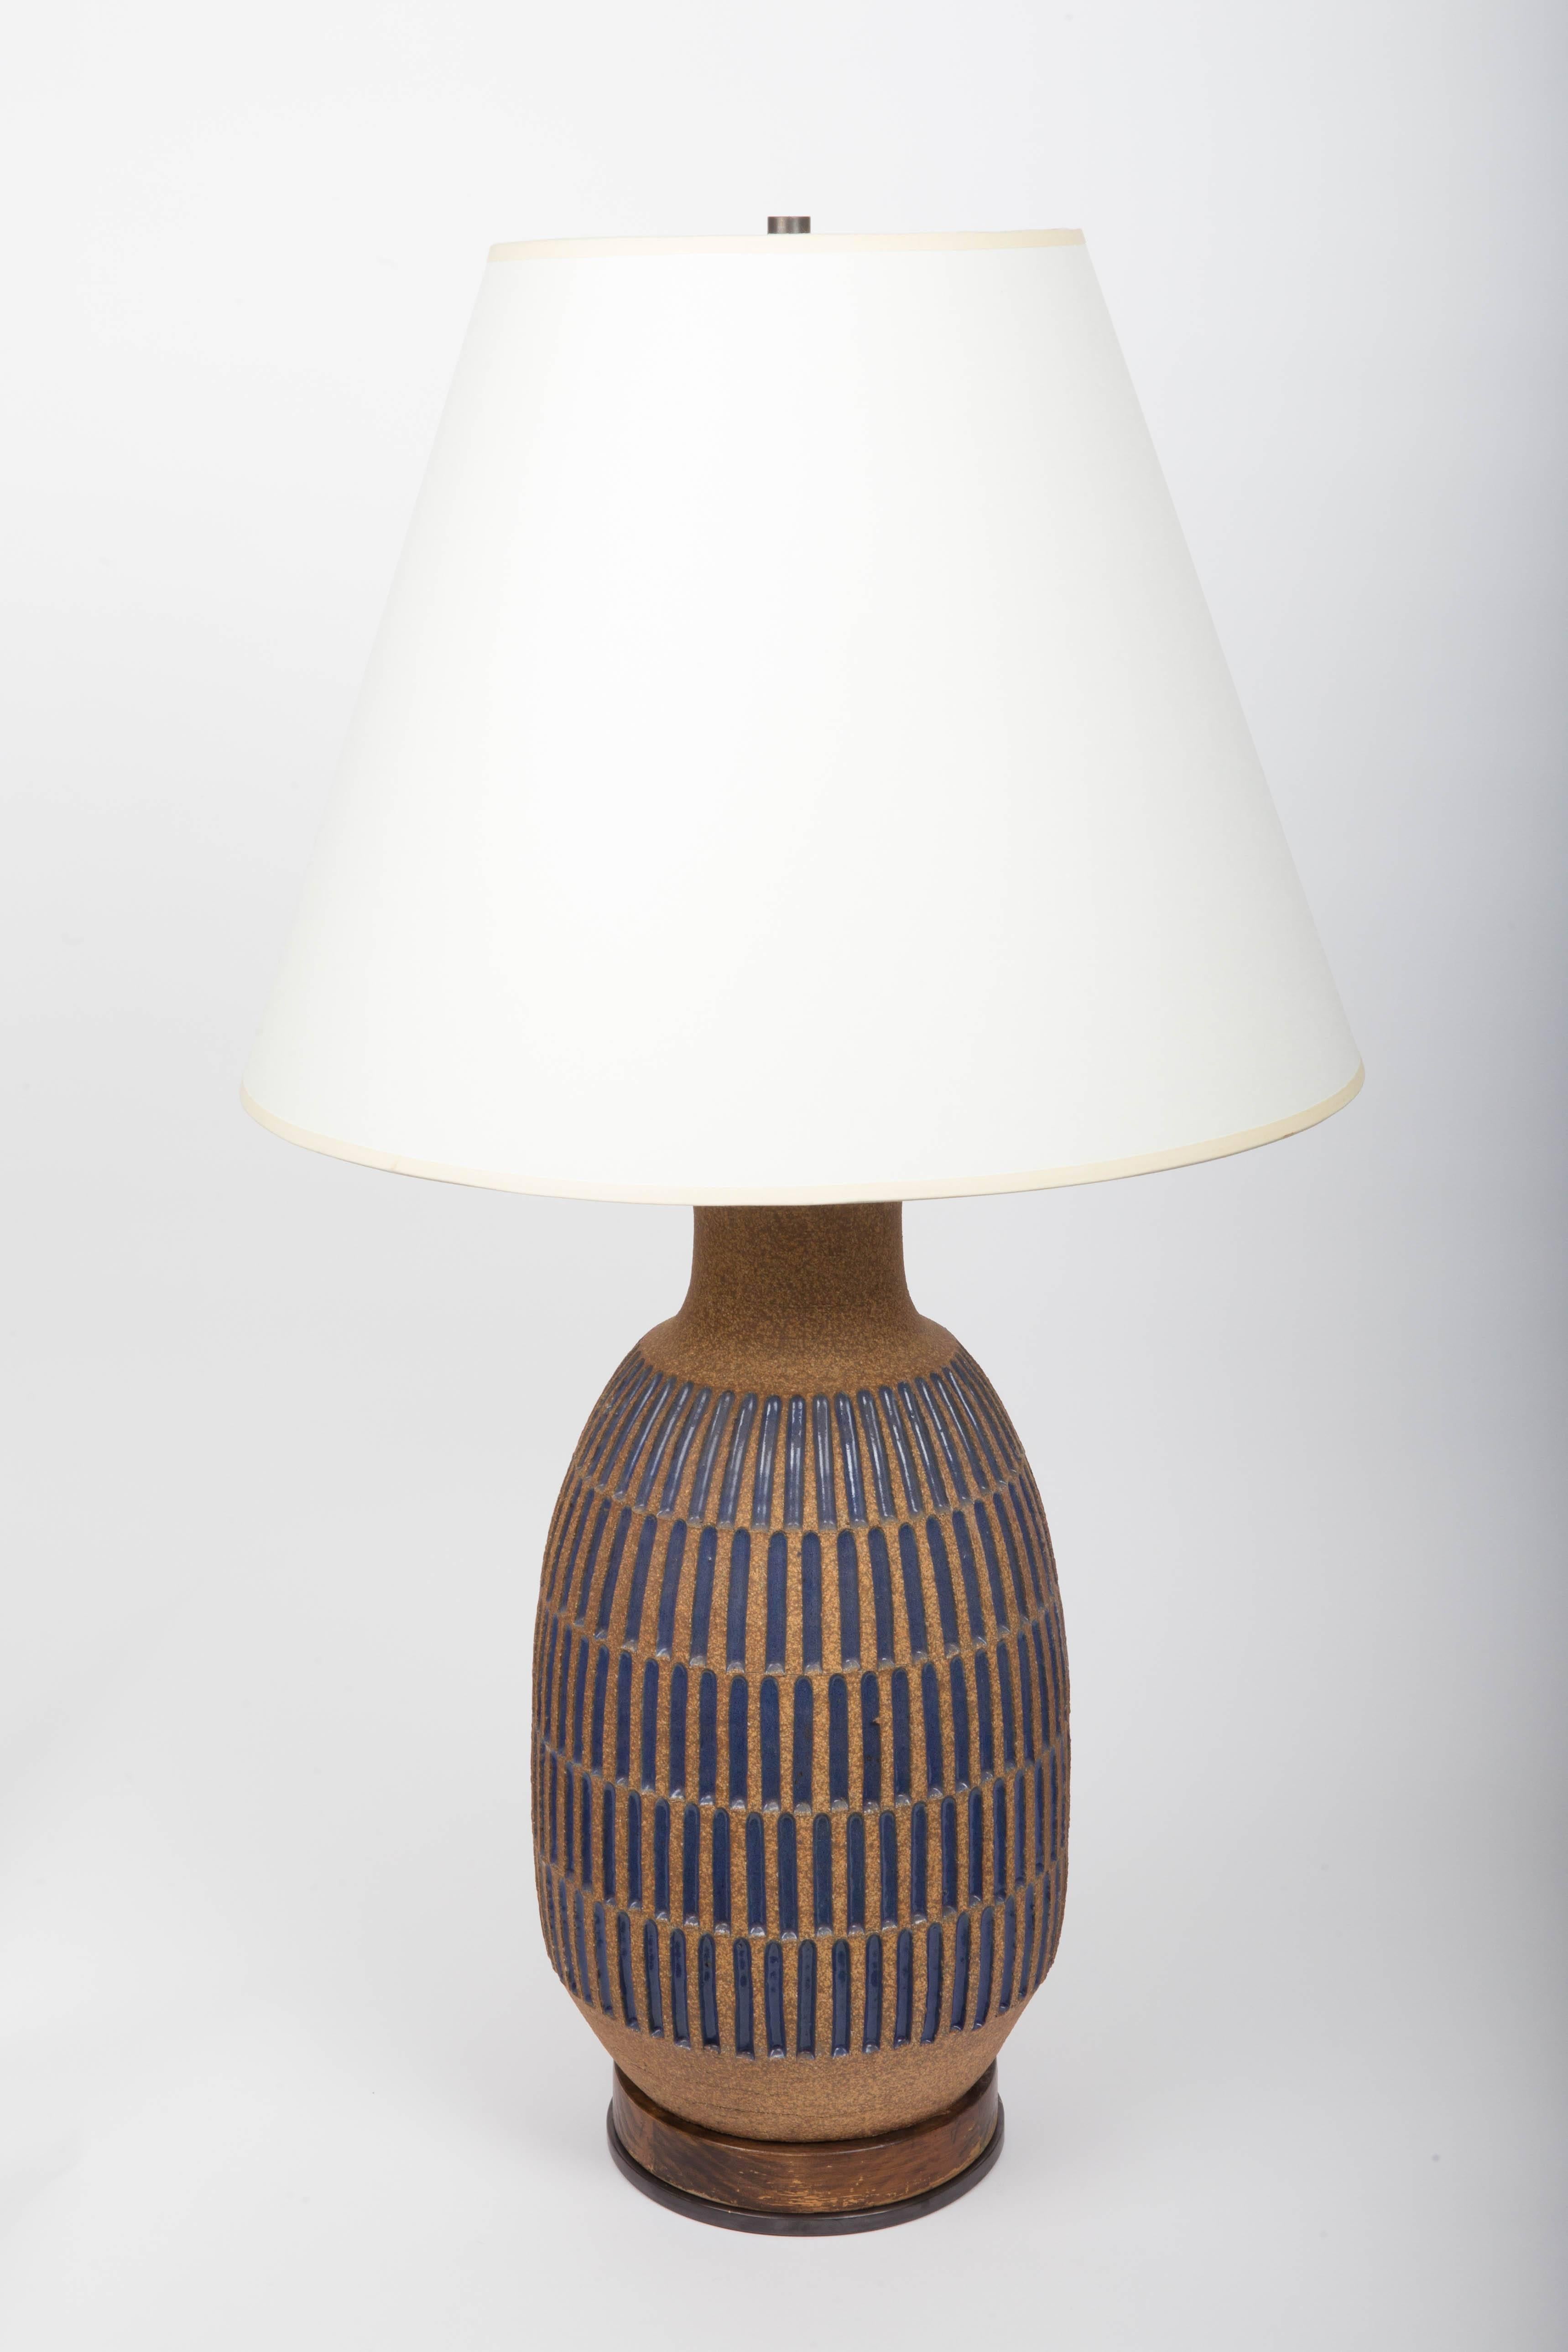 Blue Glaze Earthenware Table Lamp by David Cressey 3